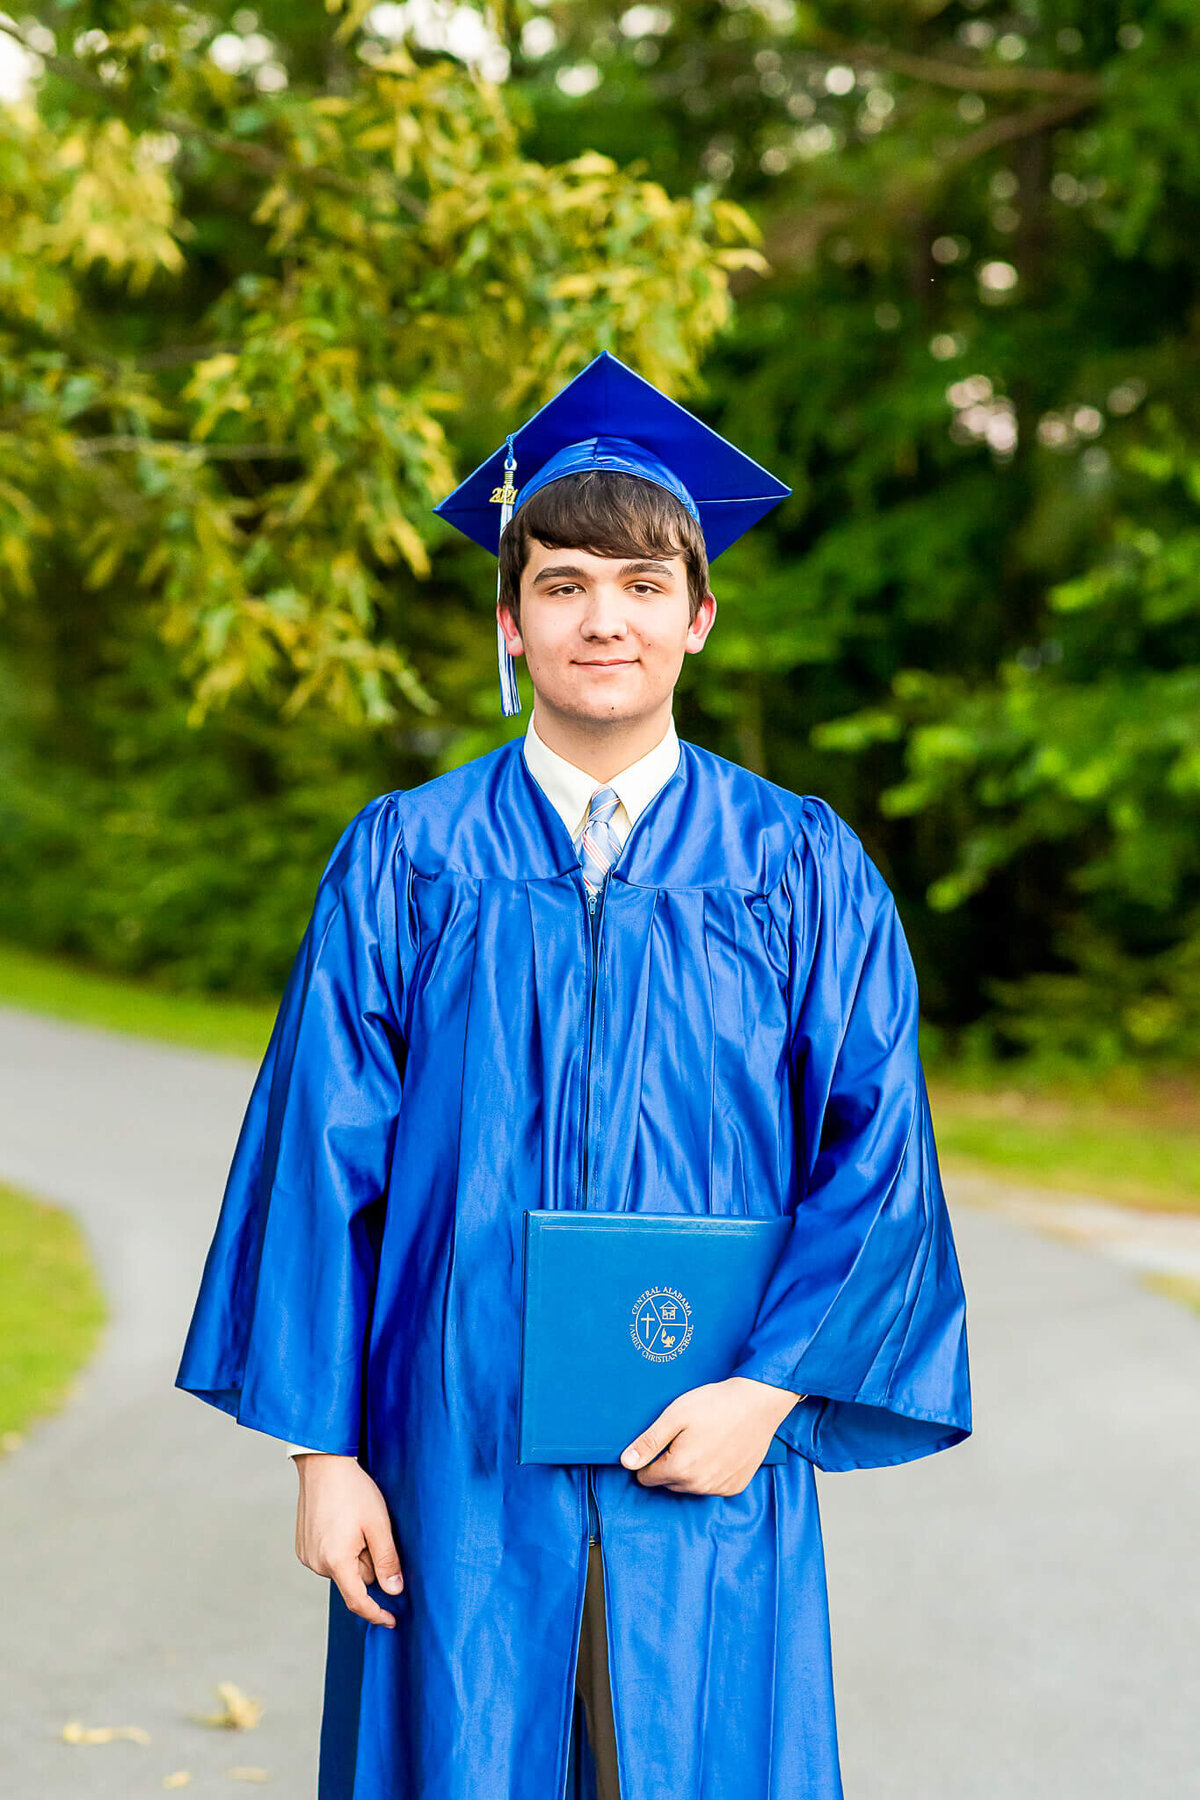 Senior boy in his cap and gown holds his diploma after graduation